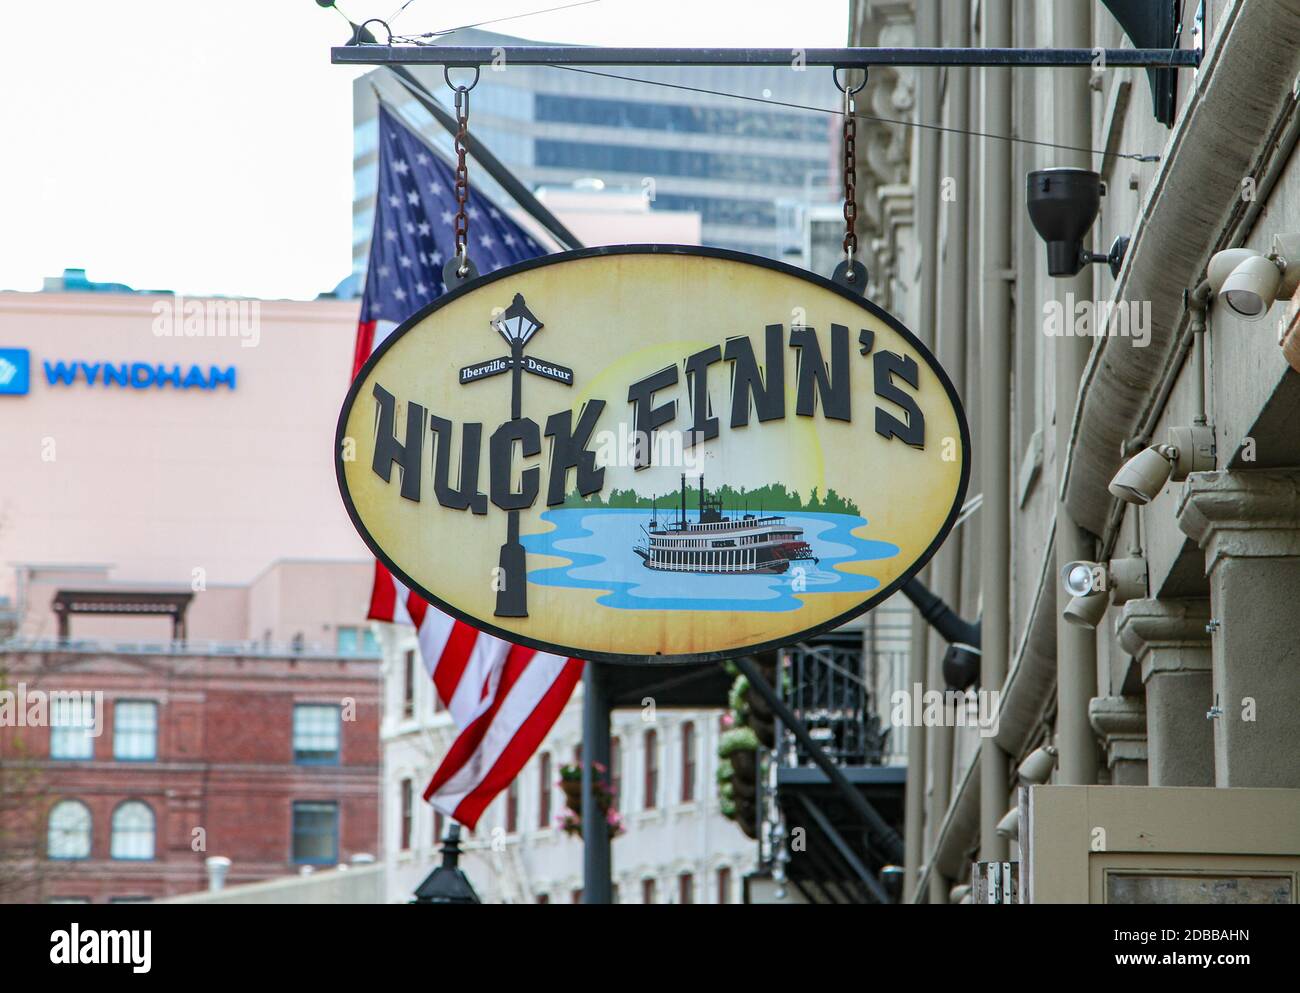 New Orleans, LA - March 27, 2016: A closeup of the sign outside of Huck Finn's restaurant on Decatur street in New Orleans. Stock Photo